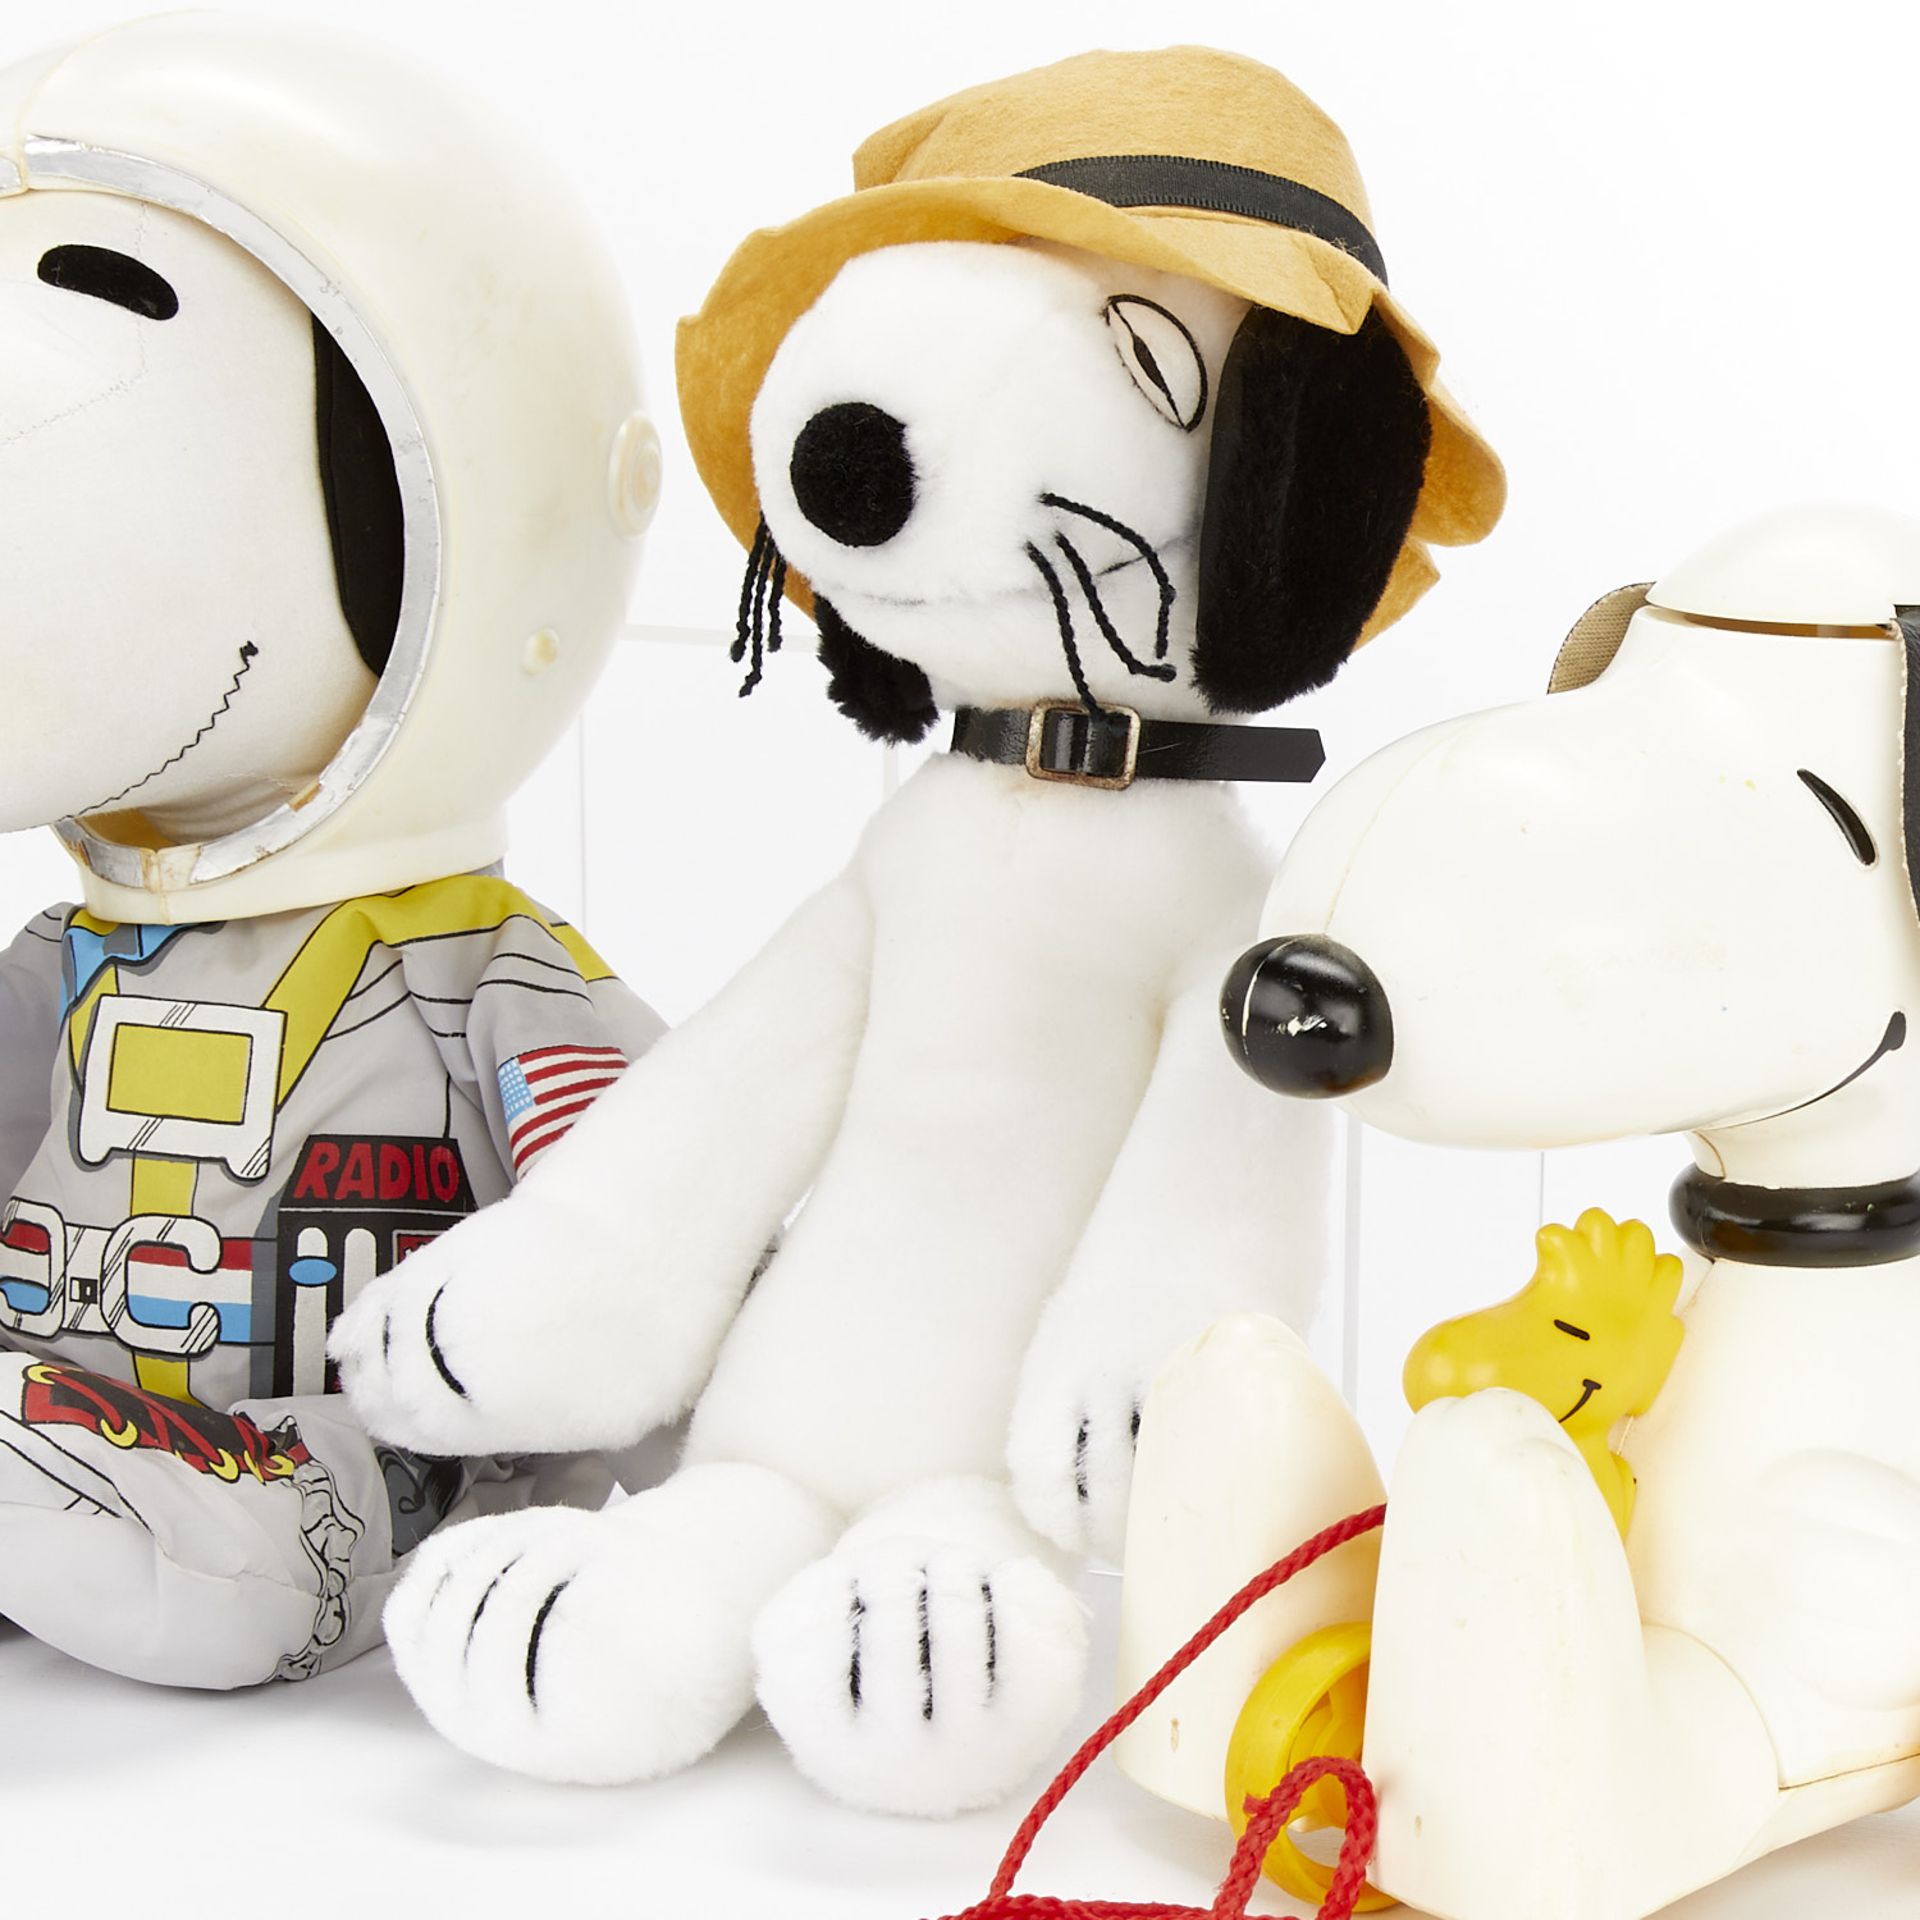 4 Vintage Dolls of Snoopy & Spike - Image 2 of 11